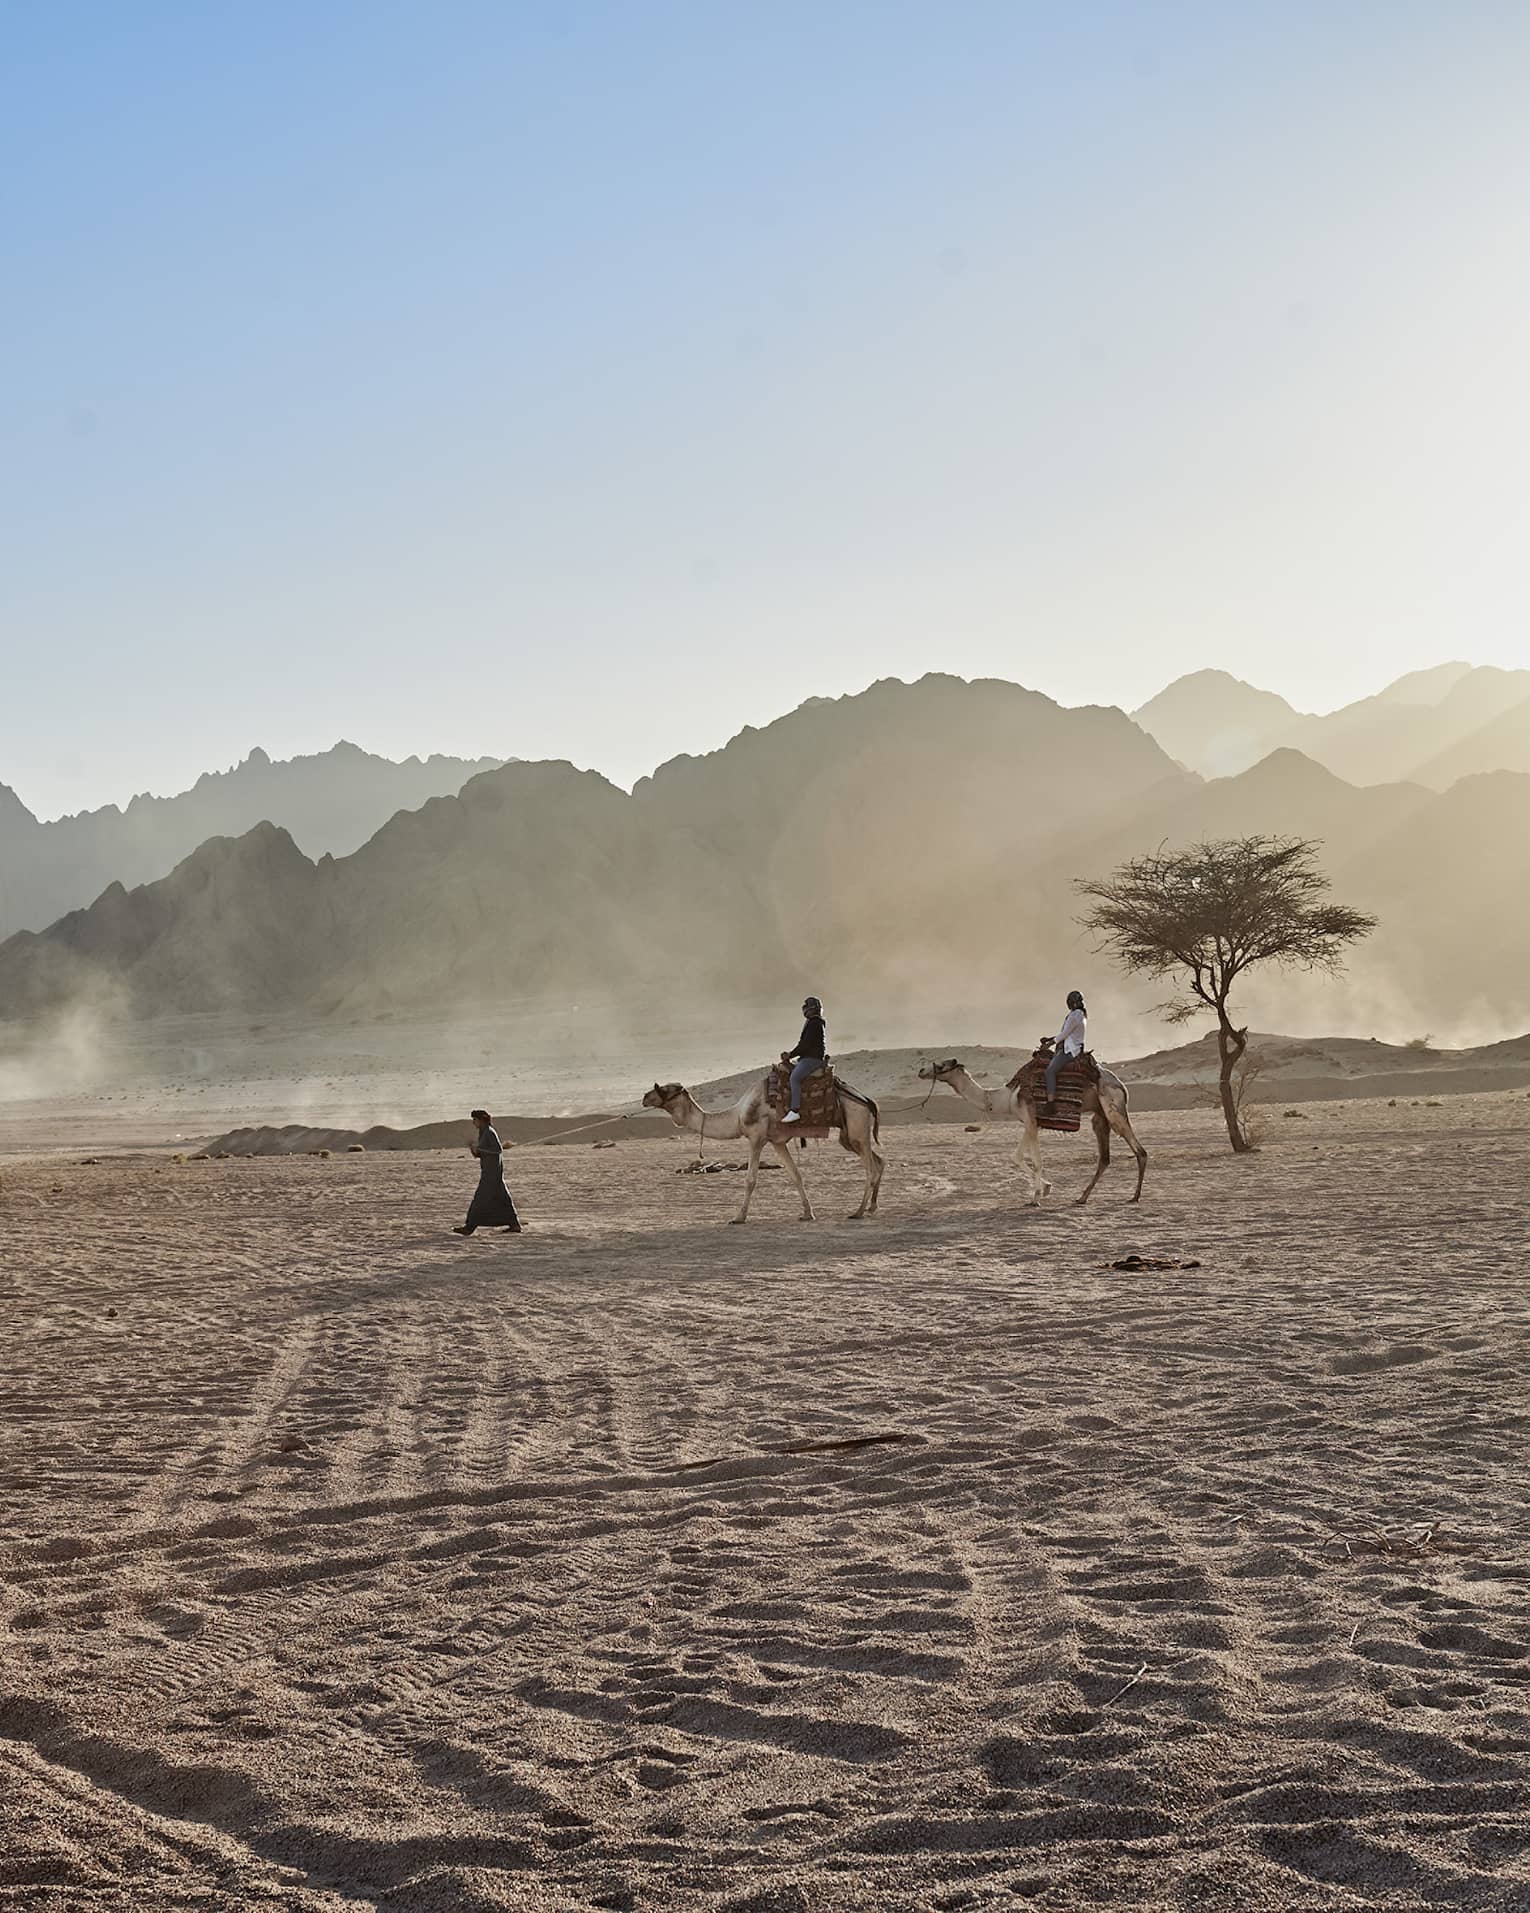 A guide lead two people riding camels in desert near small tree